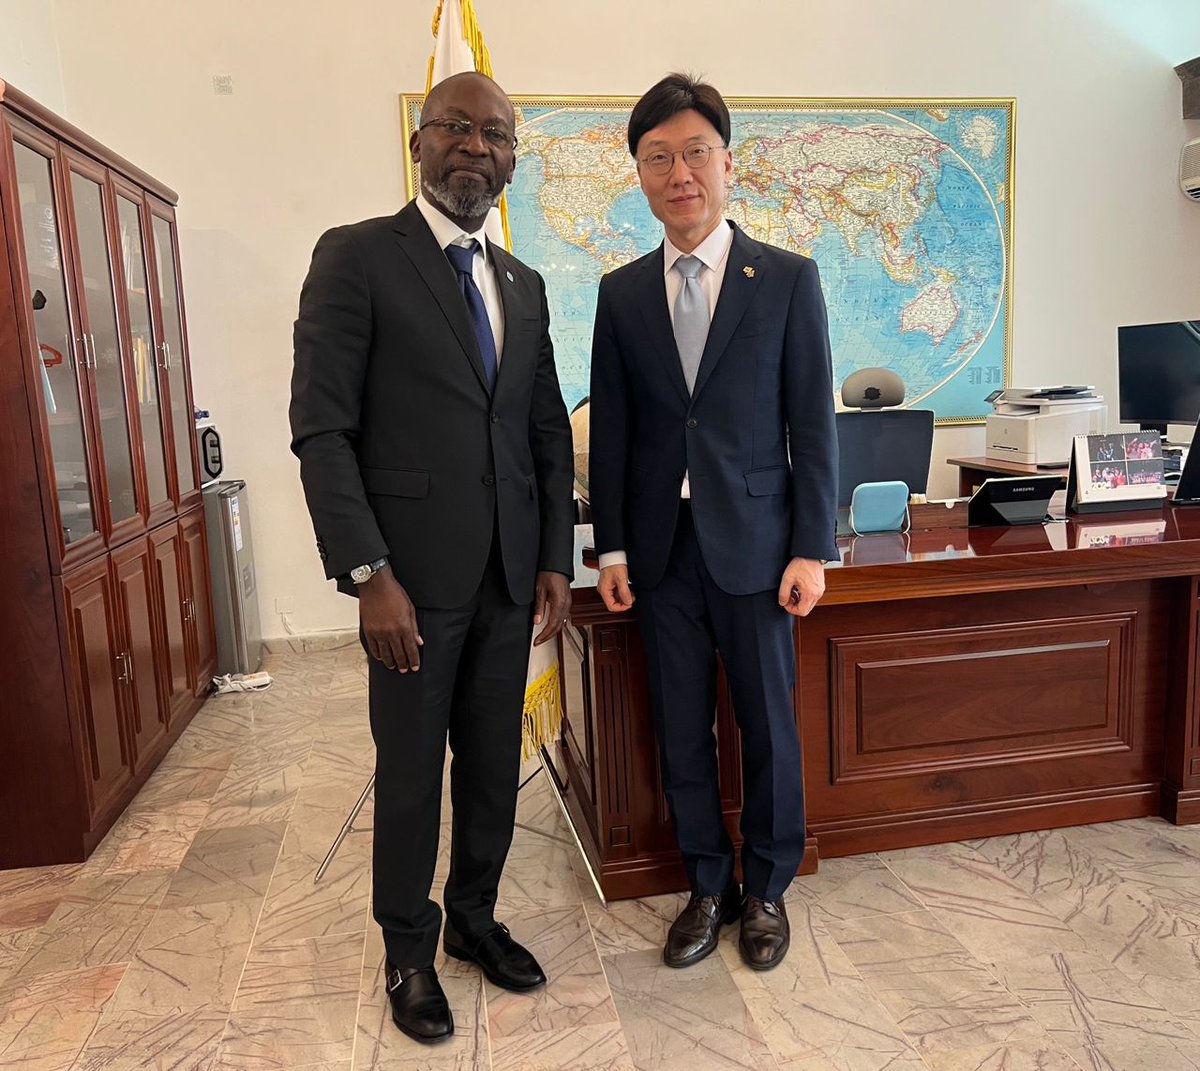 #ThankYouThursday to South Korea 🇰🇷 for your unwavering support. Beyond emergency assistance, today's meeting marks a pivotal moment as we discuss a long-term vision to promote access to healthy food in the DRC 🇨🇩